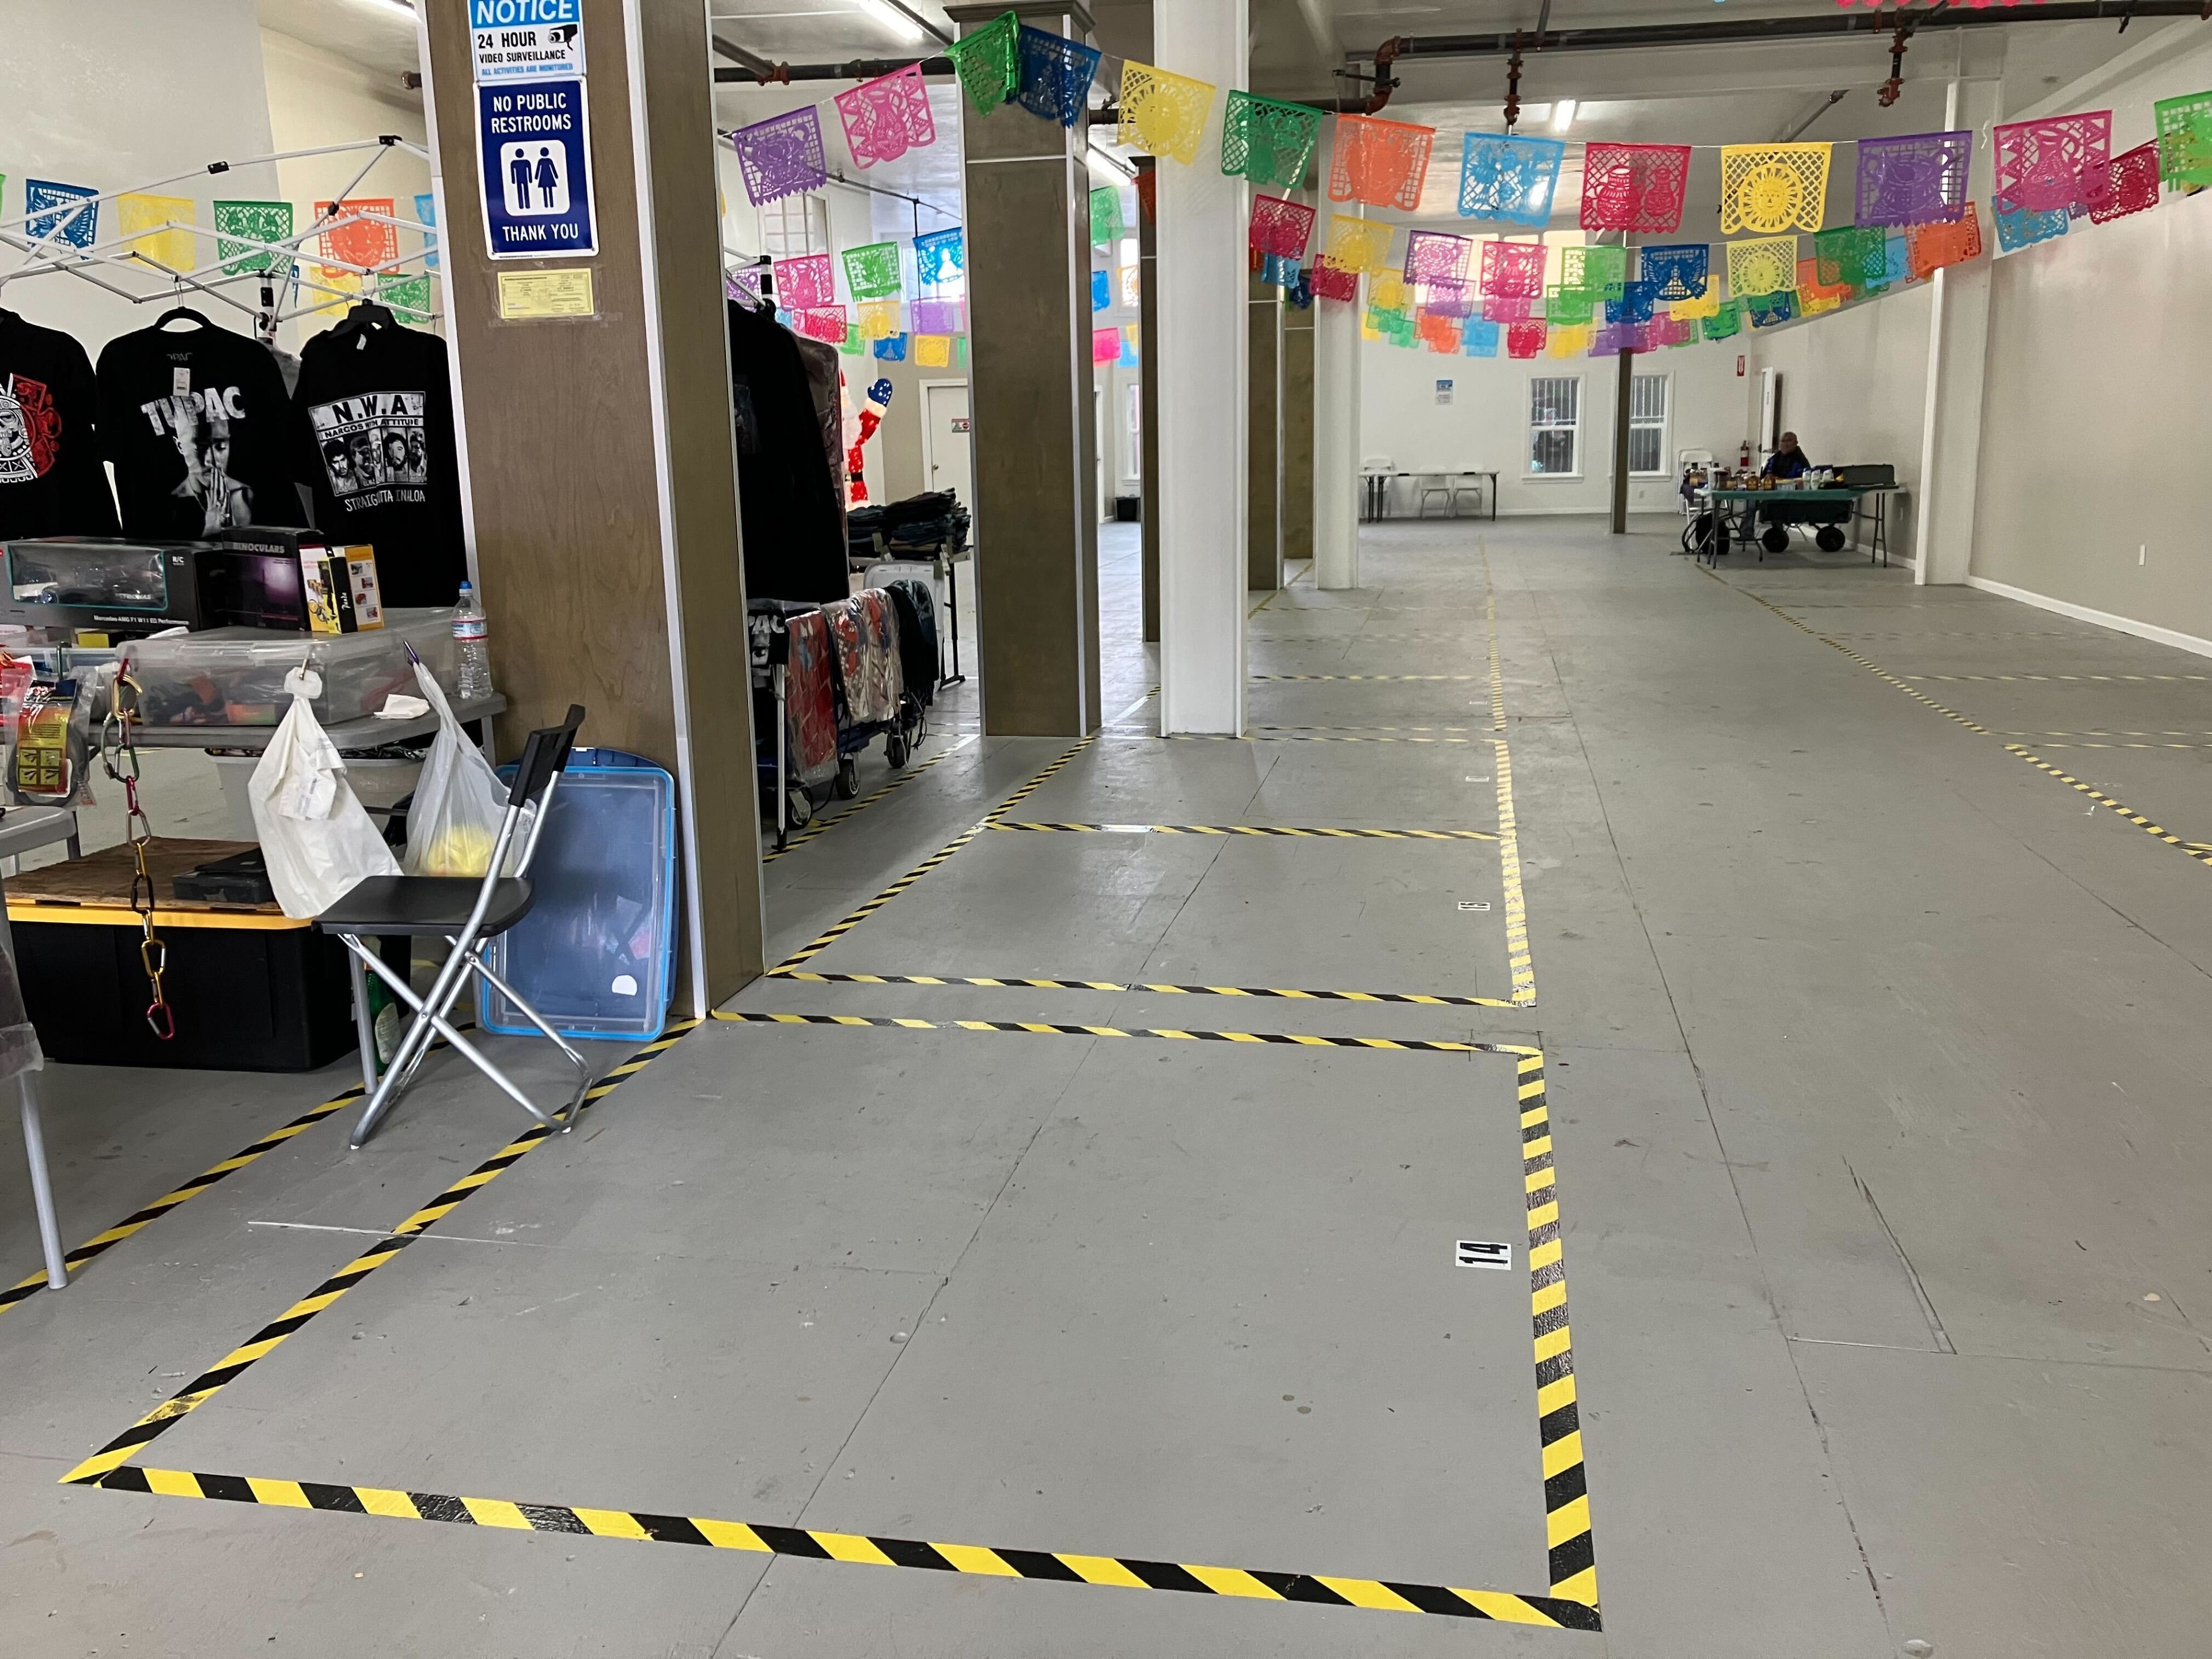 Empty spaces inside of the approved vendor space at 2137 Mission Street on Sunday.